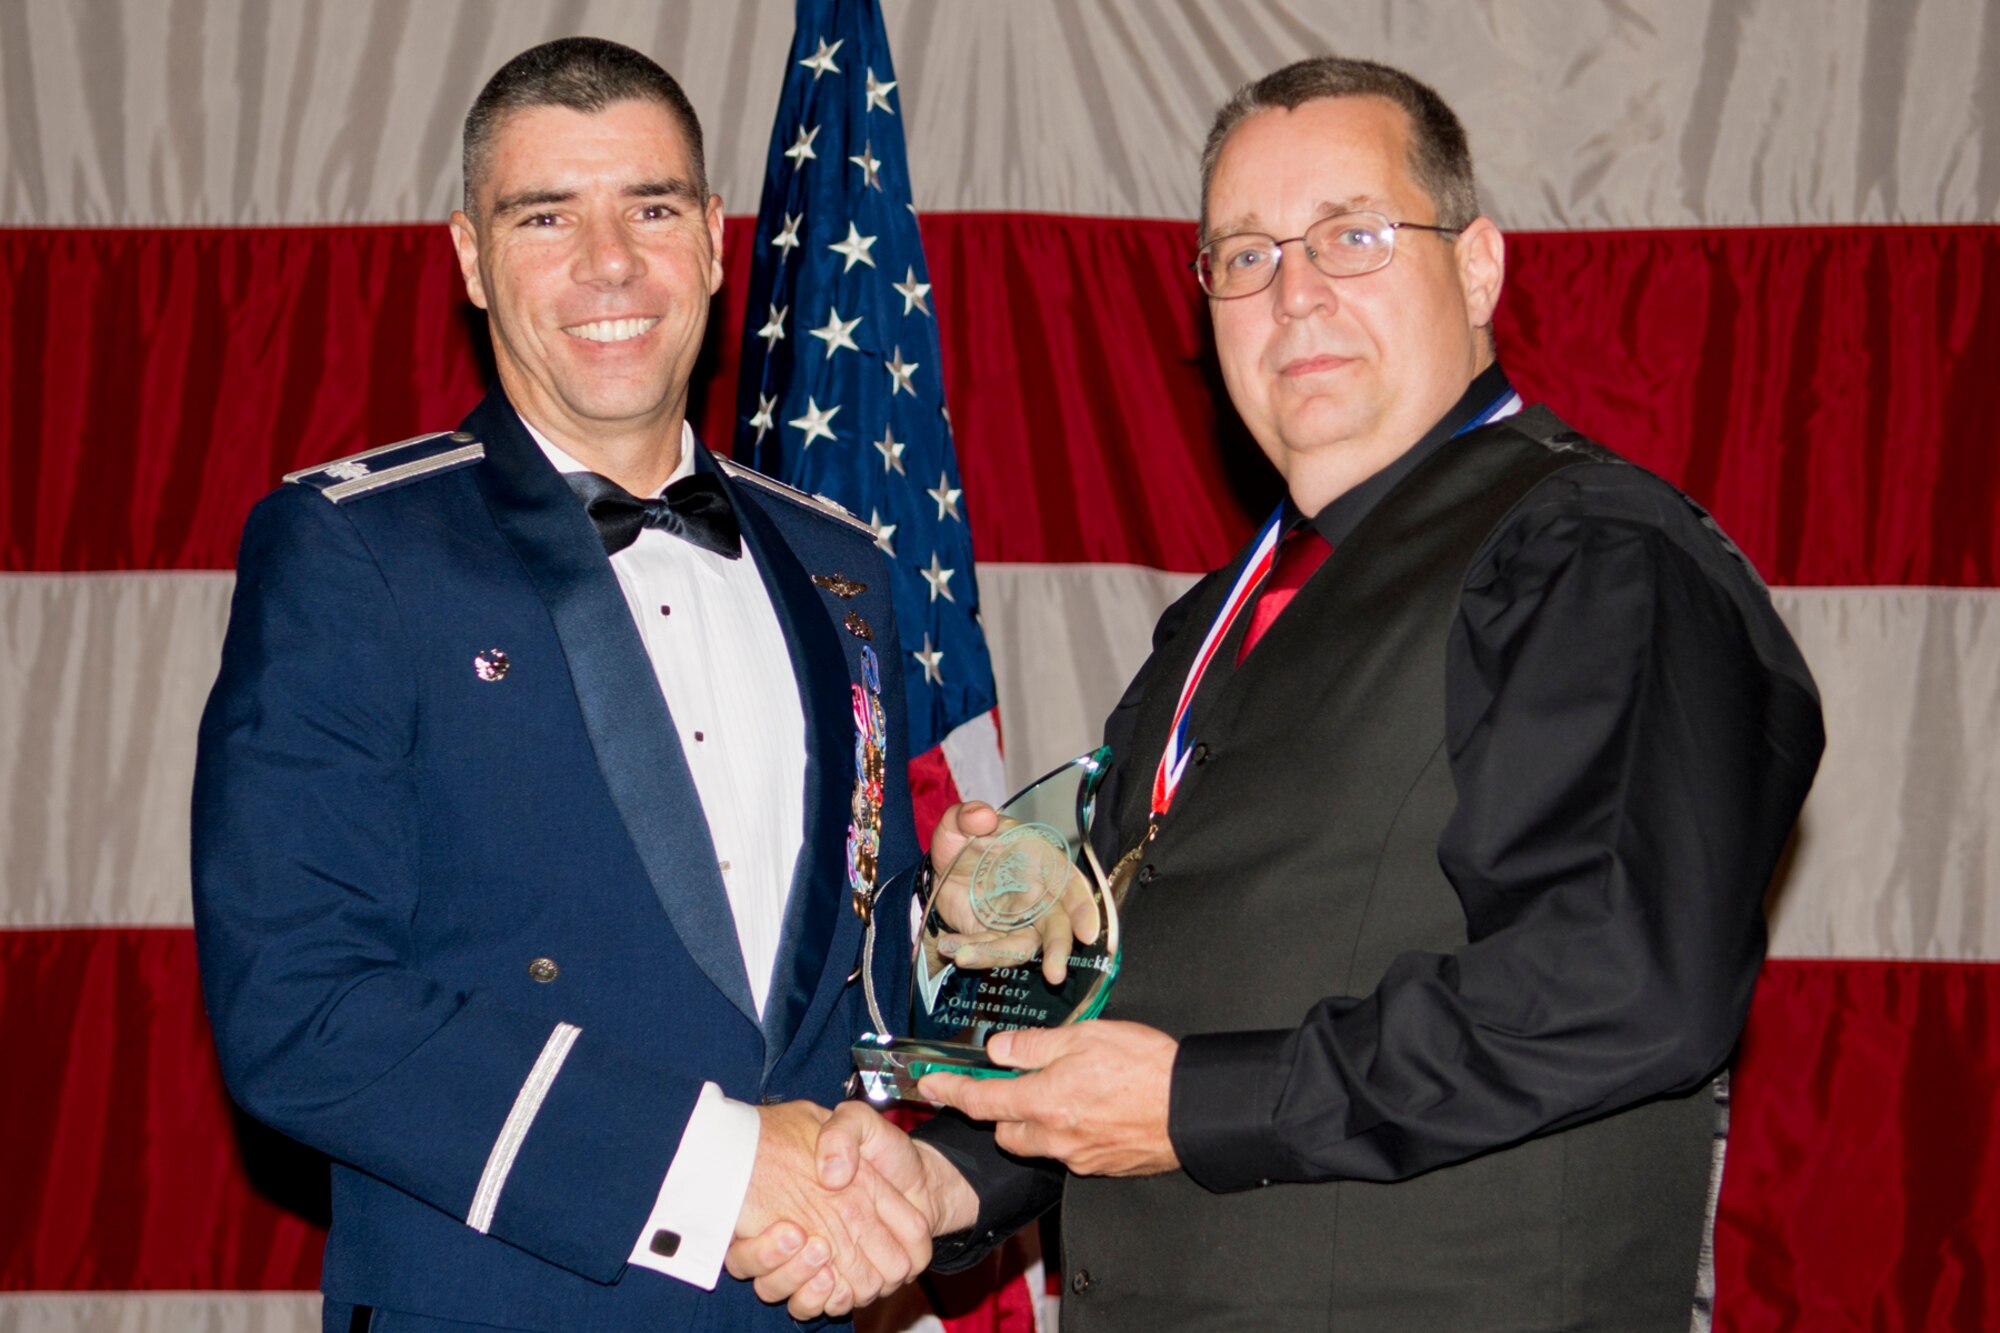 U.S. Air Force Lt. Col. Kenneth Rose, 307th Maintenance Group commander, presents the Gatorfest Safety Award to Clarence Carmack, 307th Aircraft Maintenance Squadron, Dec. 1, 2012, Barksdale Air Force Base, La. The award is given to an individual or individuals whose performance within the past year has contributed greatly to the overall safety of the maintenance community. (U.S. Air Force photo by Master Sgt. Greg Steele/Released)